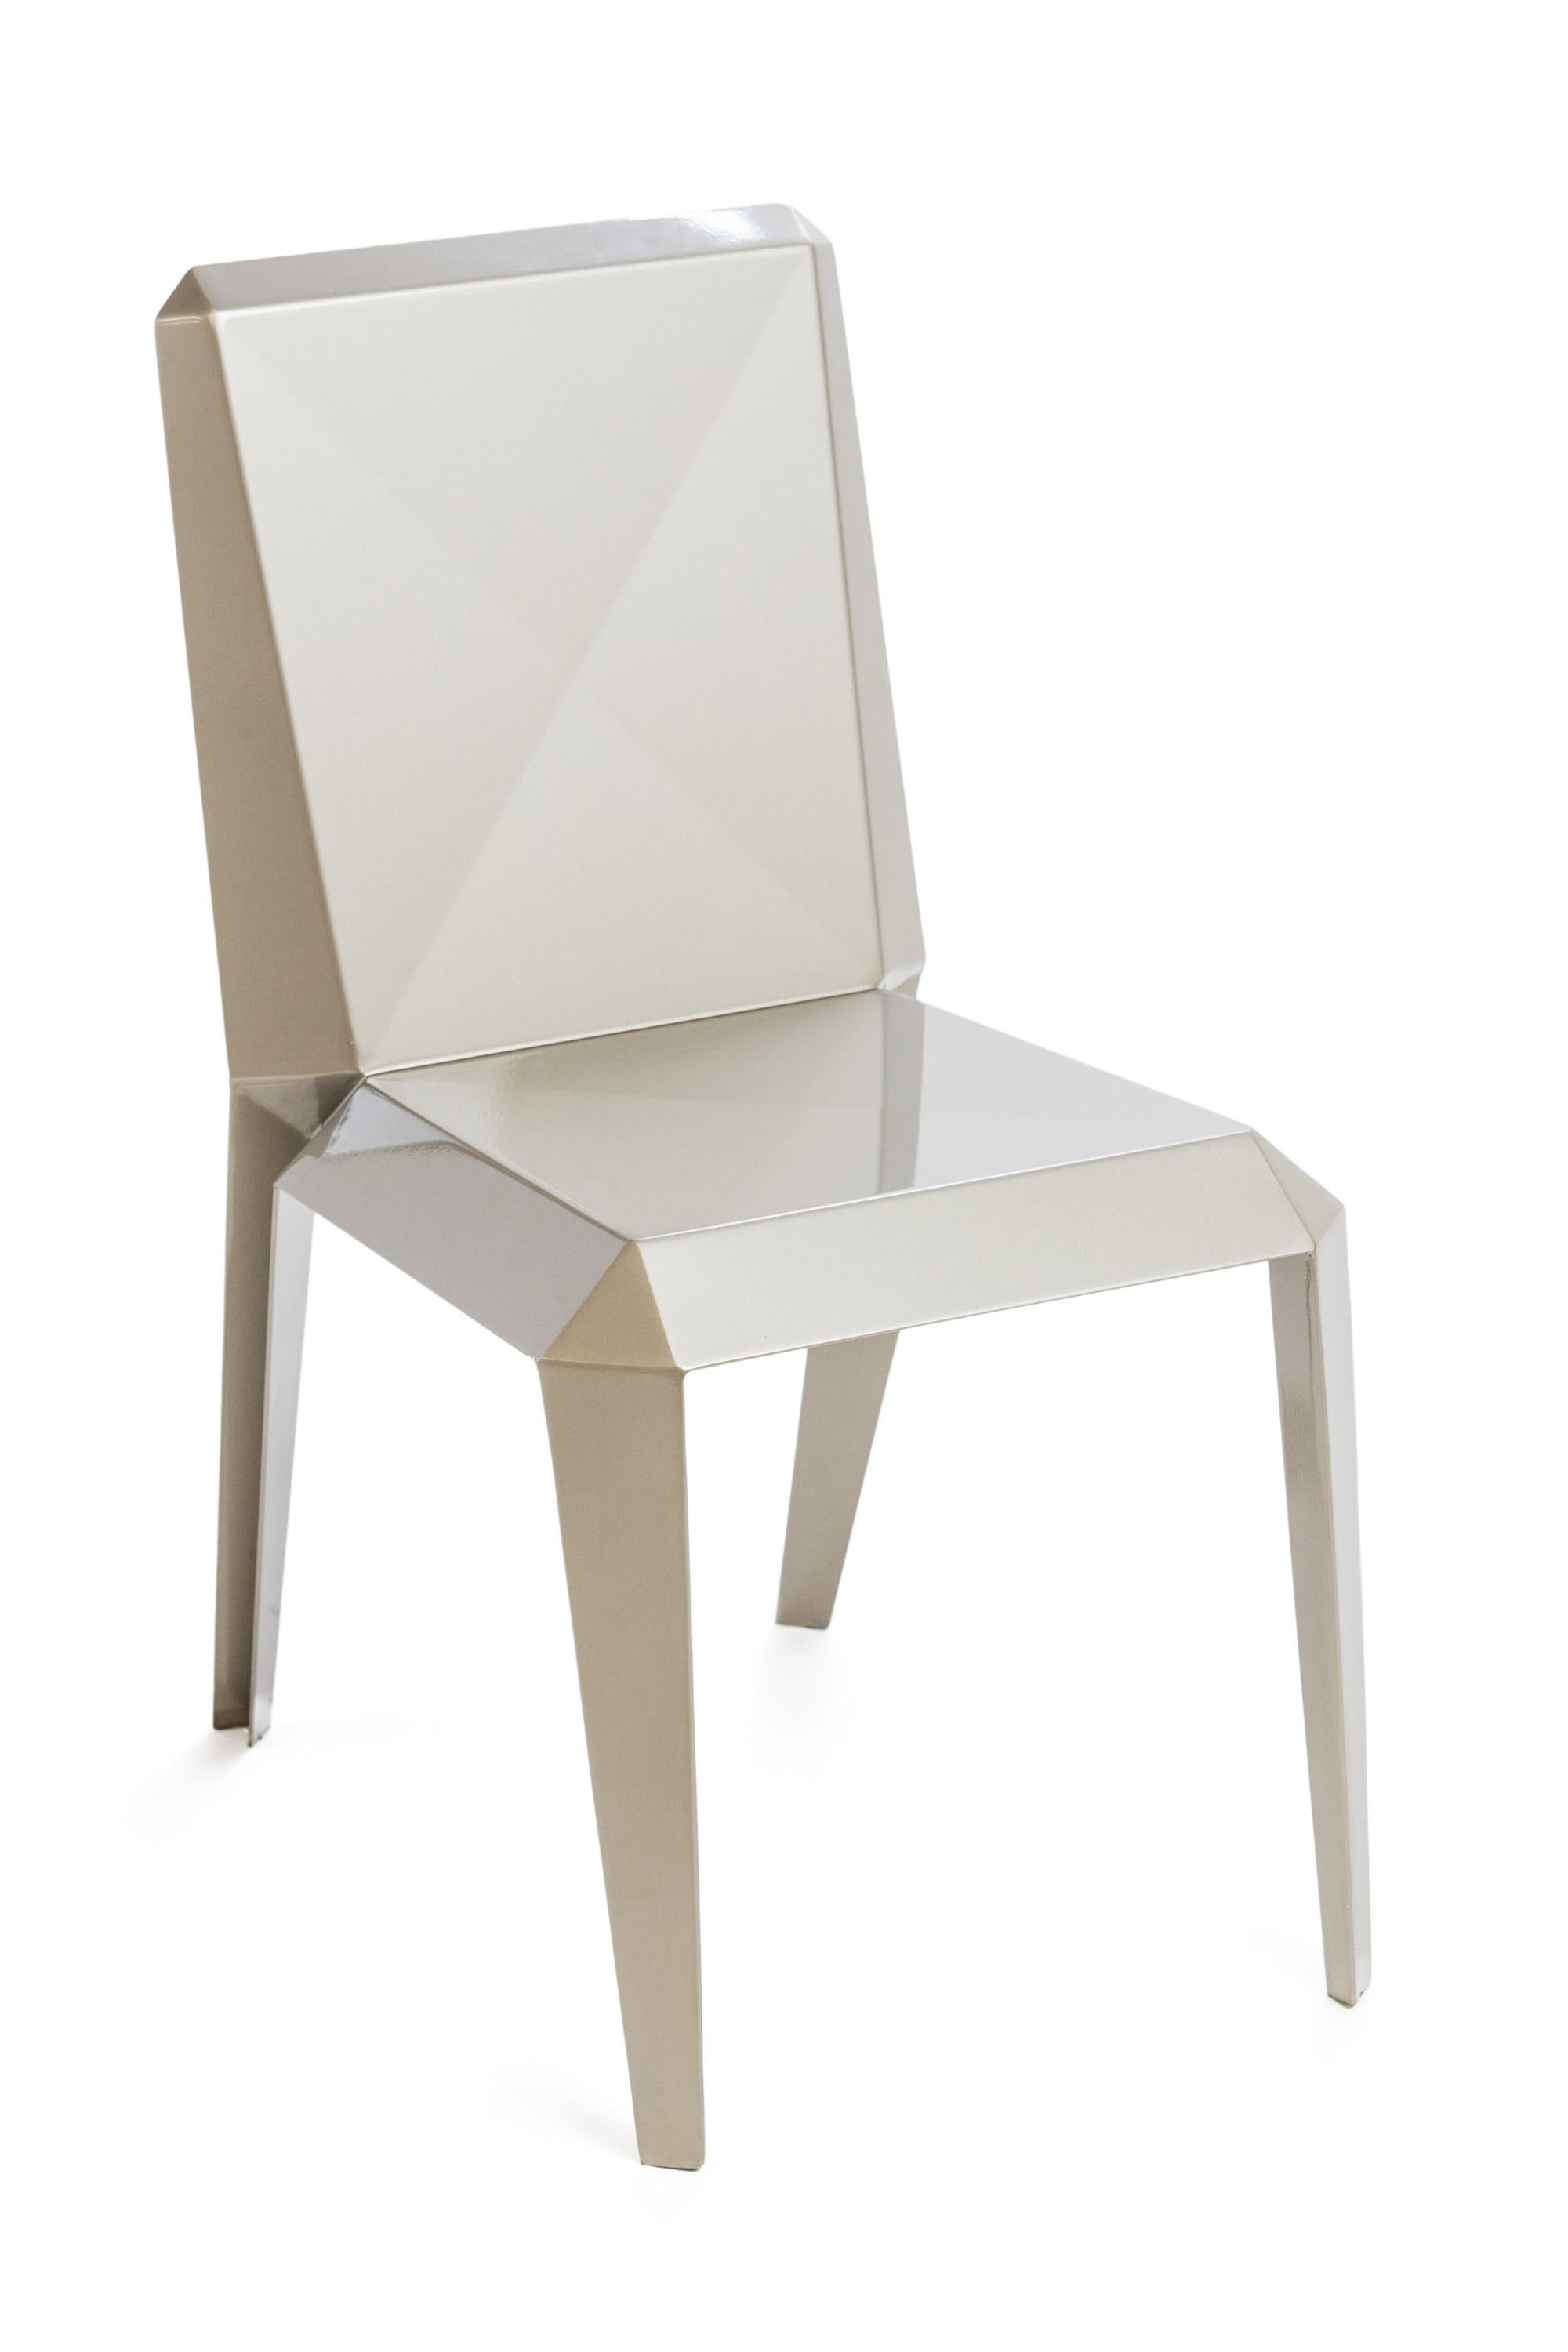 Modern Contemporary Lingotto Chair in Aluminium by Altreforme For Sale